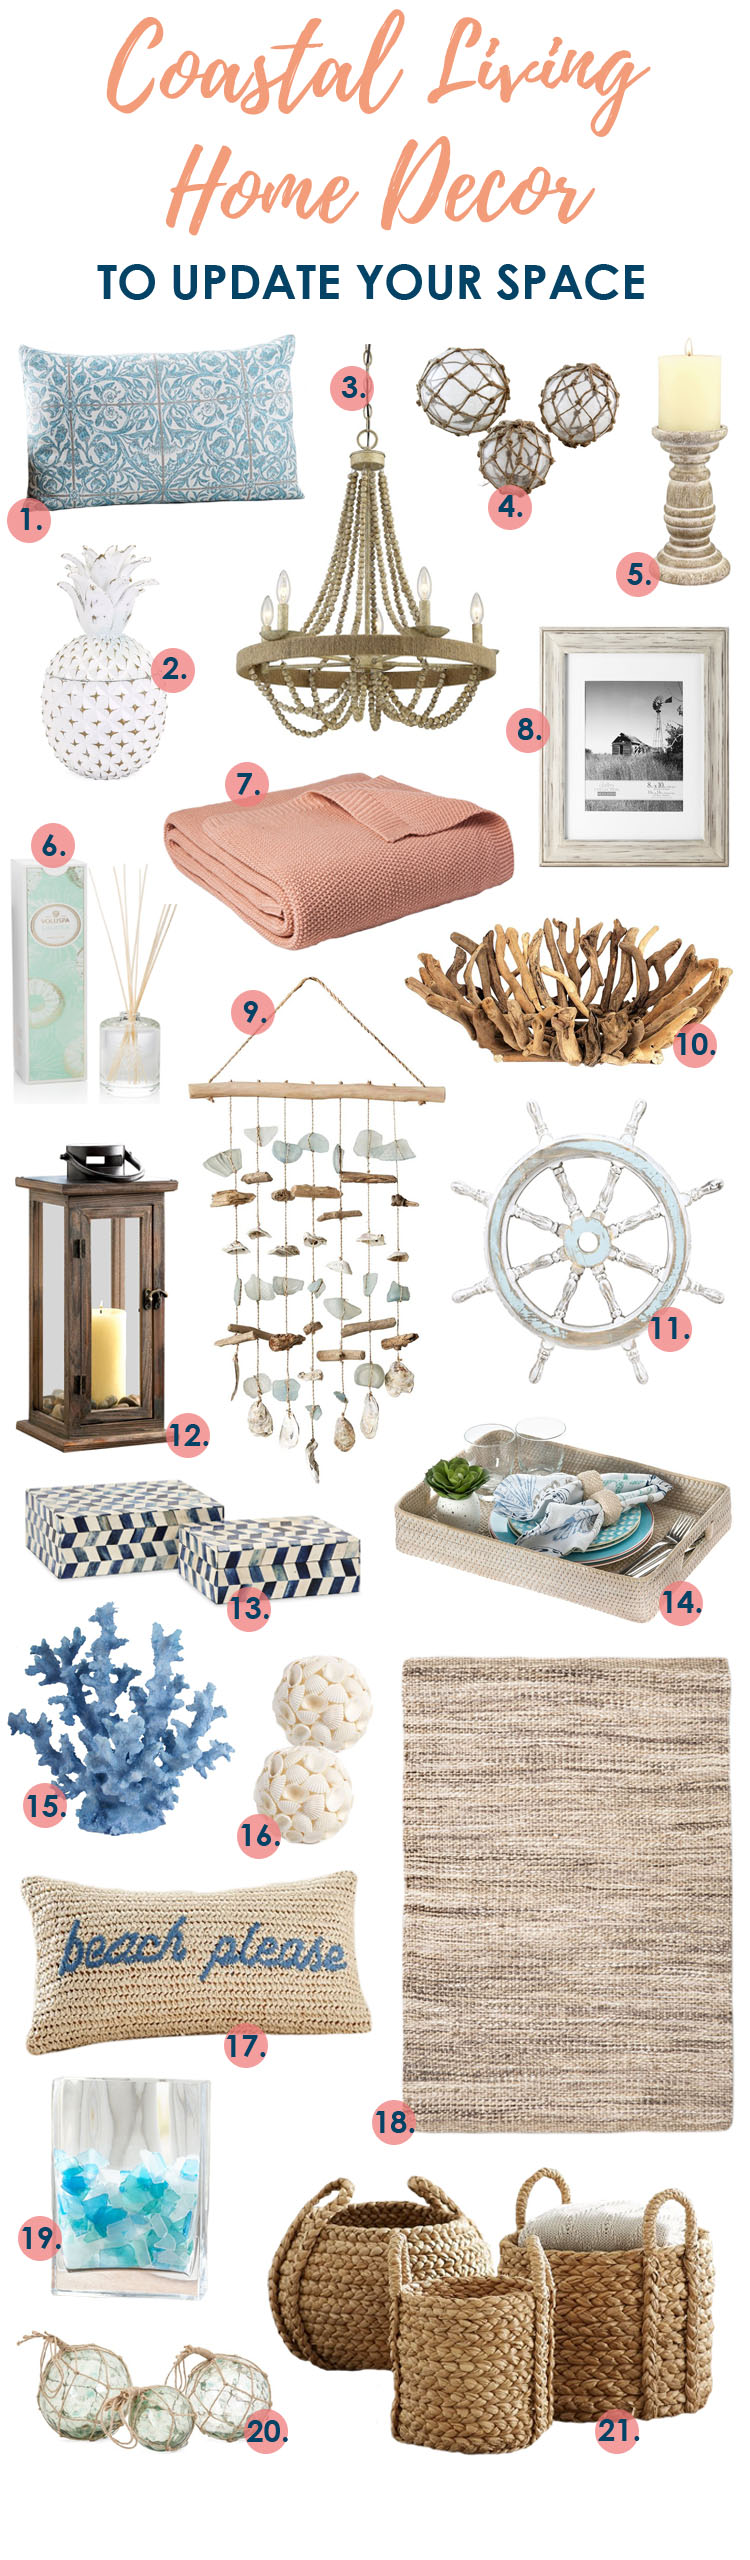 Coastal Living Home Decor to Update Your Space